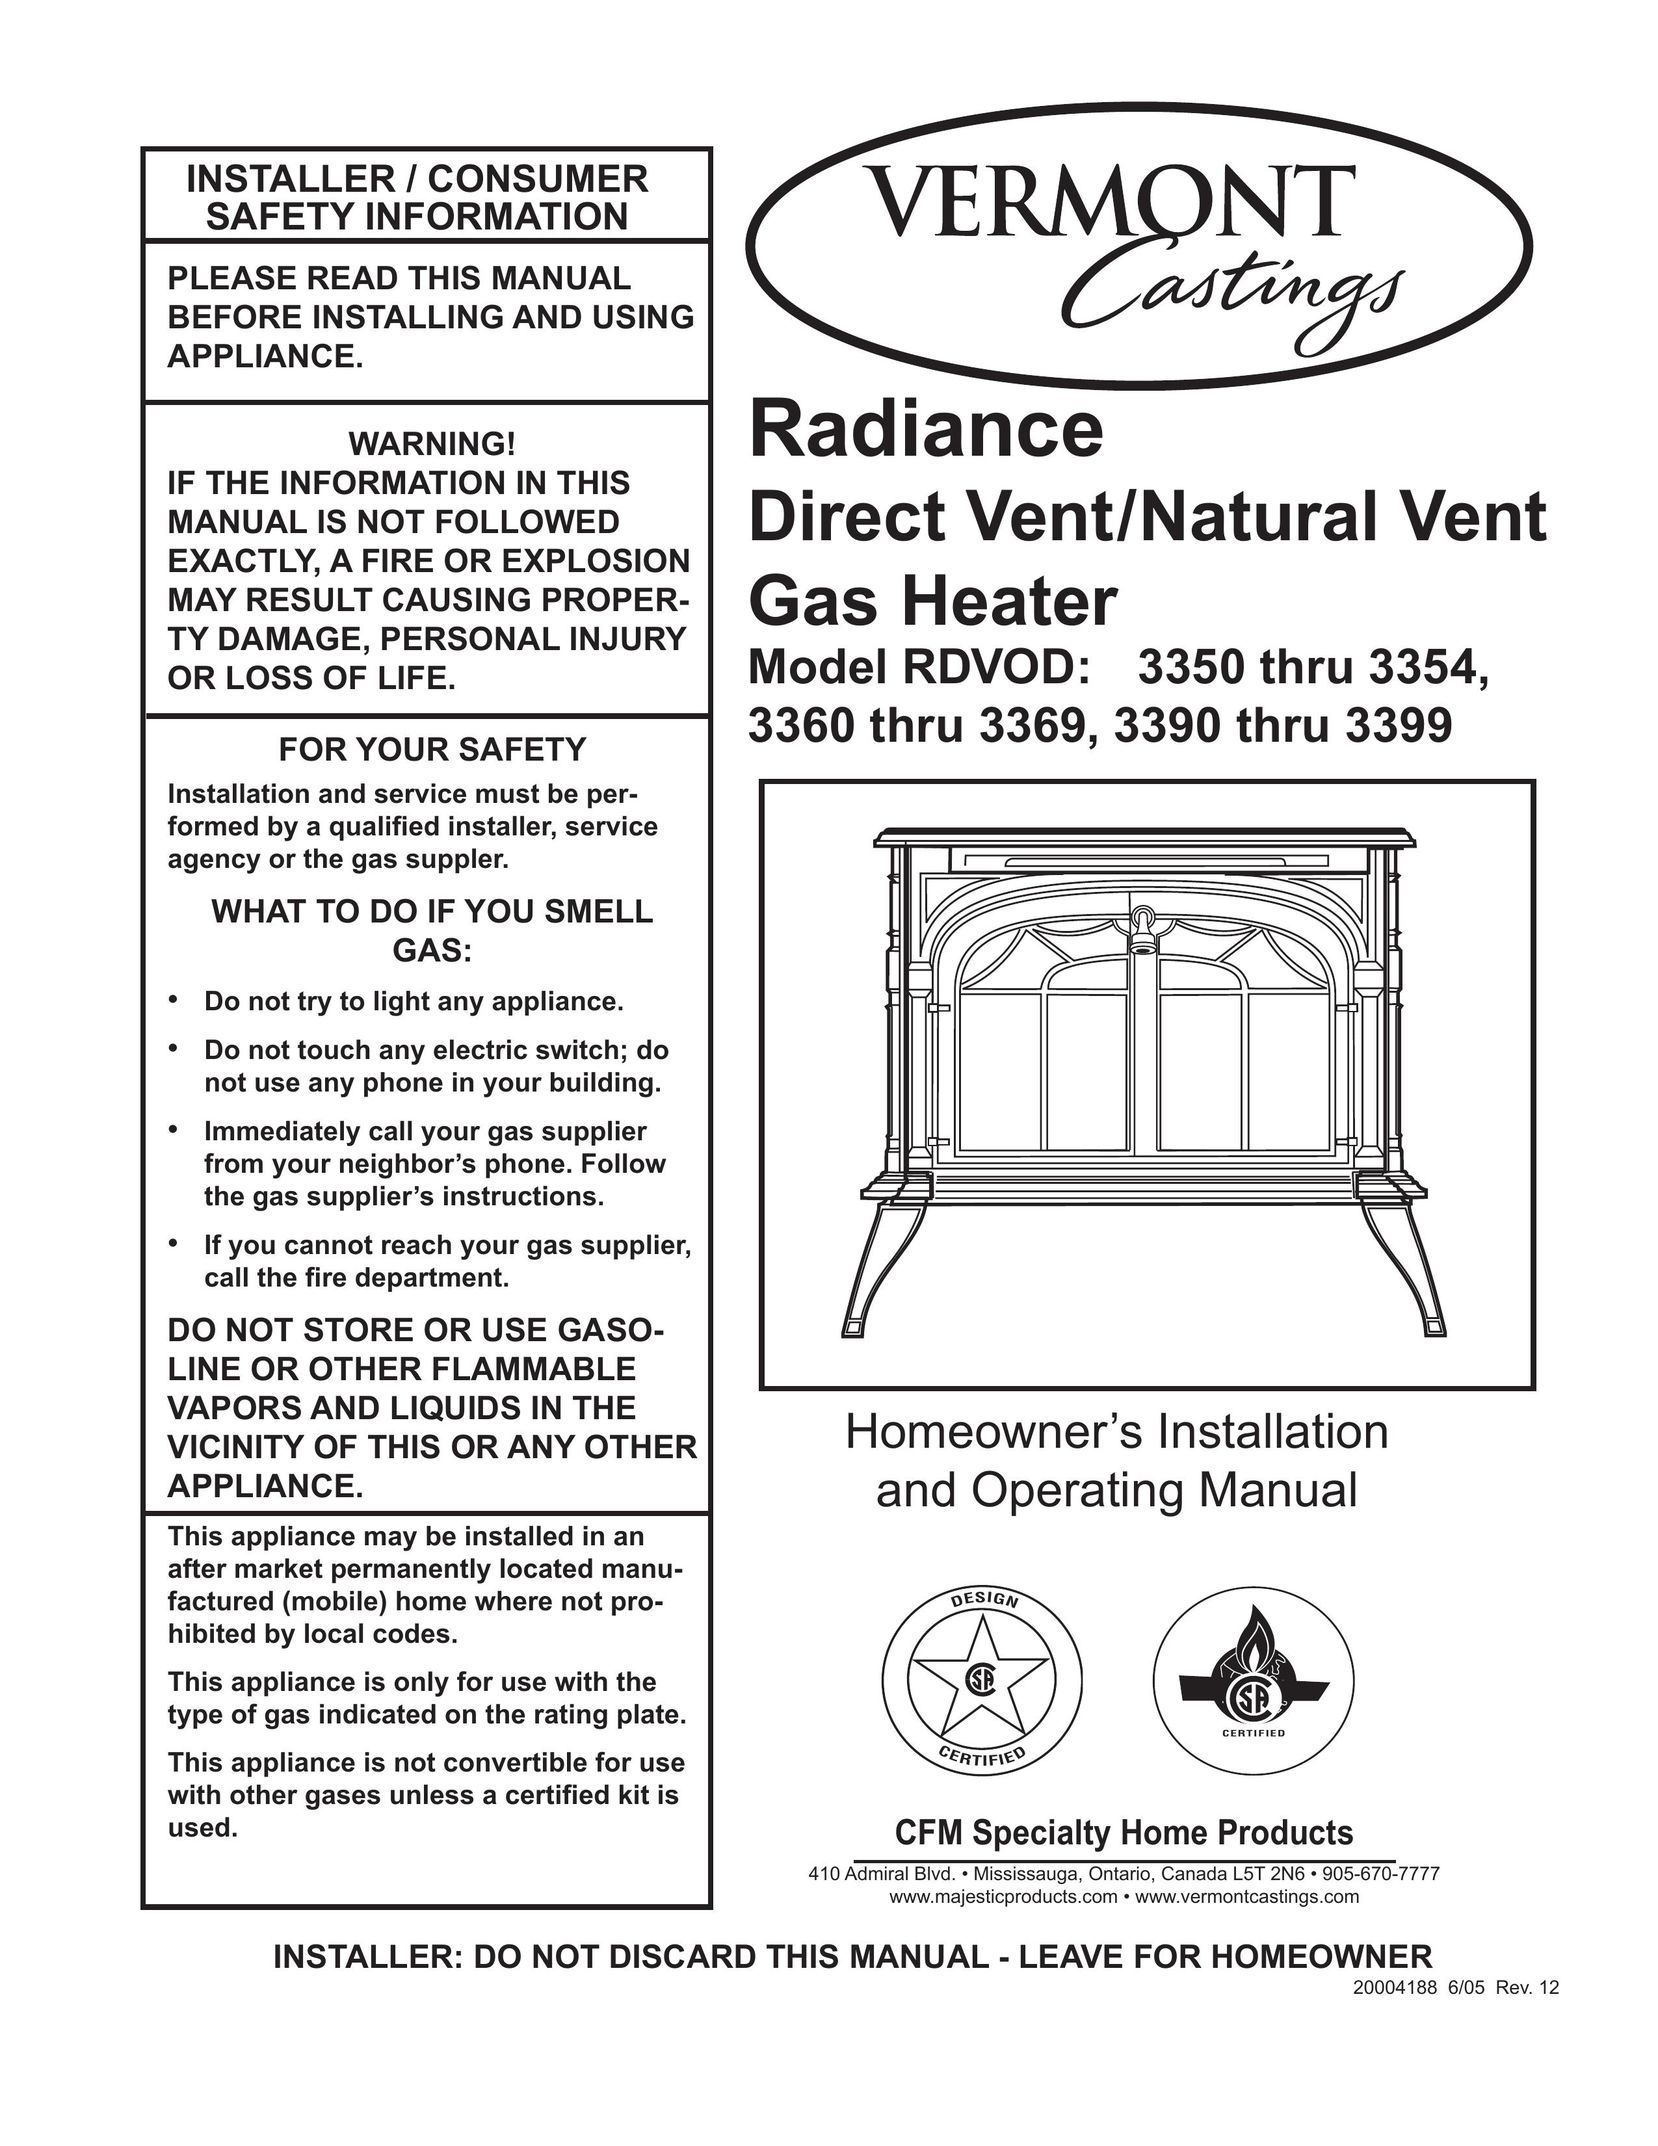 Vermont Casting RDVOD 3399 Electric Heater User Manual